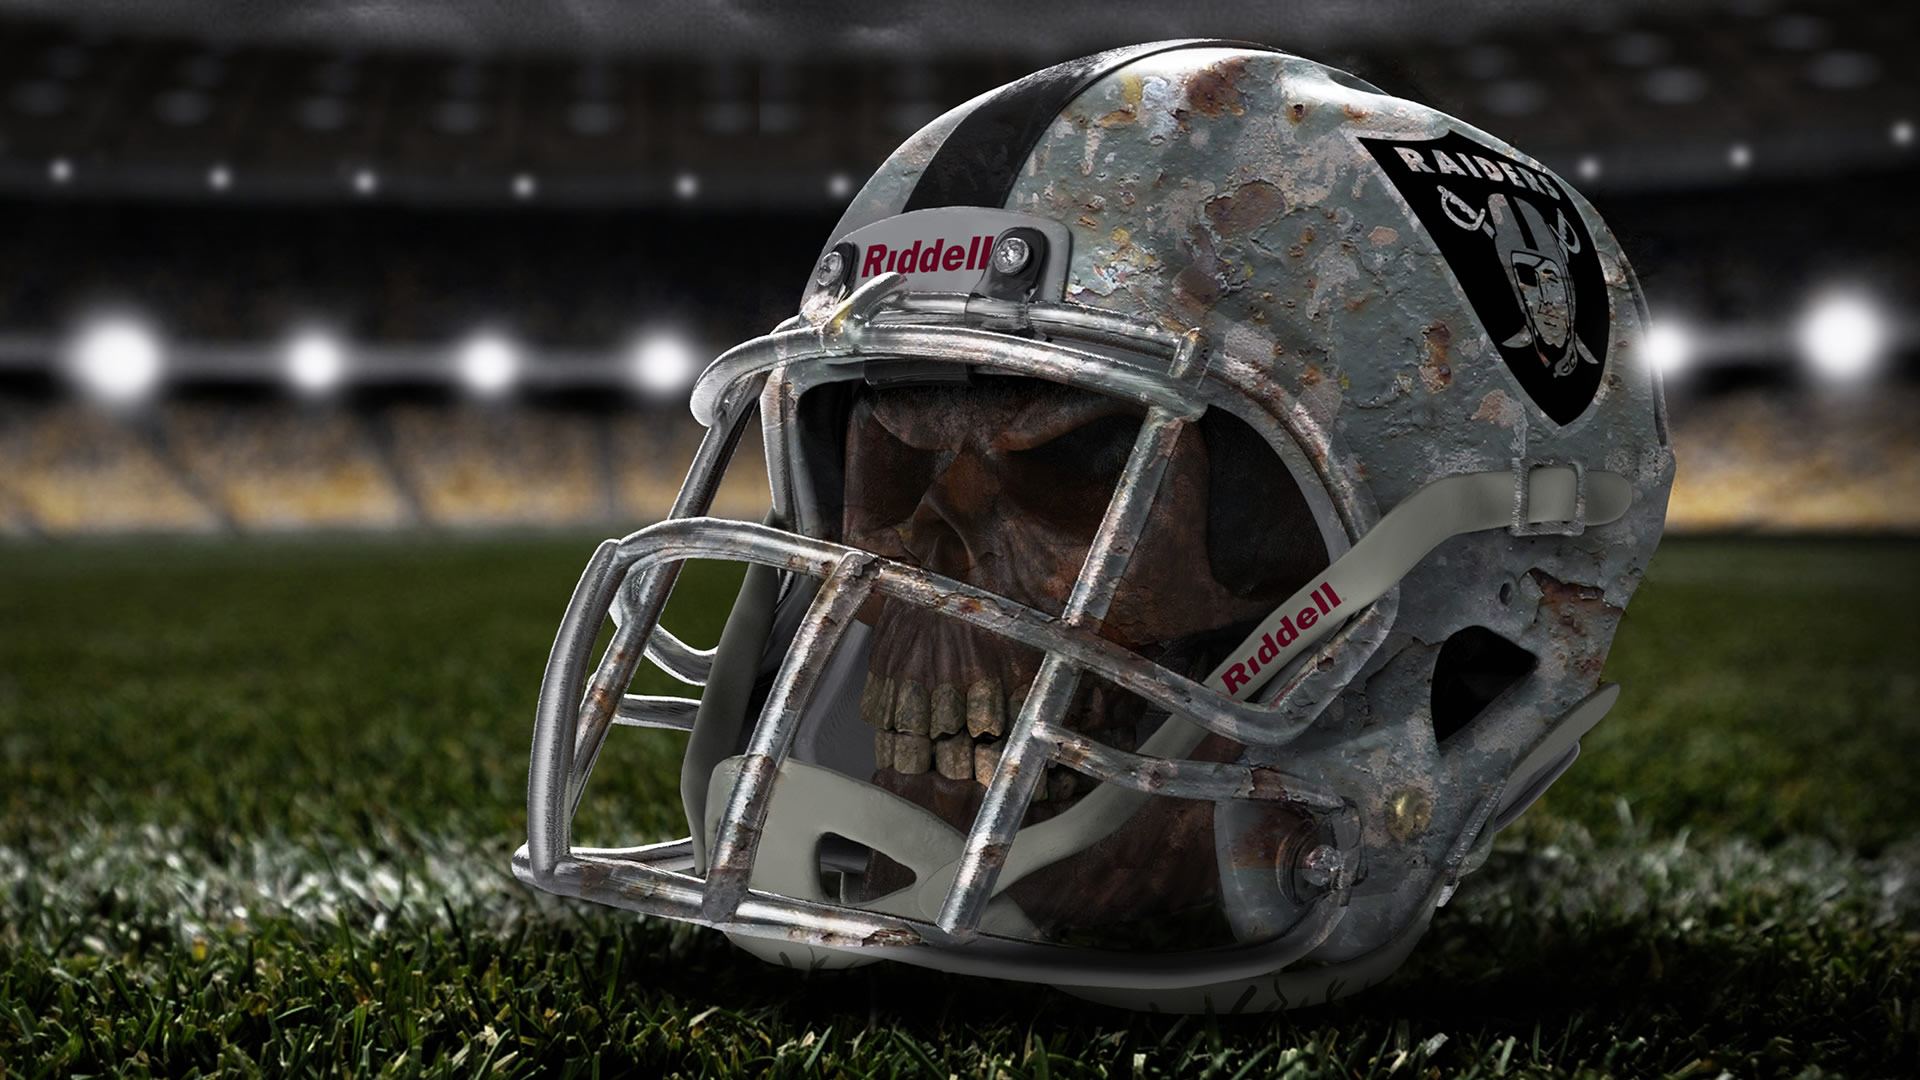 Raiders Logo Wallpapers HD | Wallpapers, Backgrounds, Images, Art ...